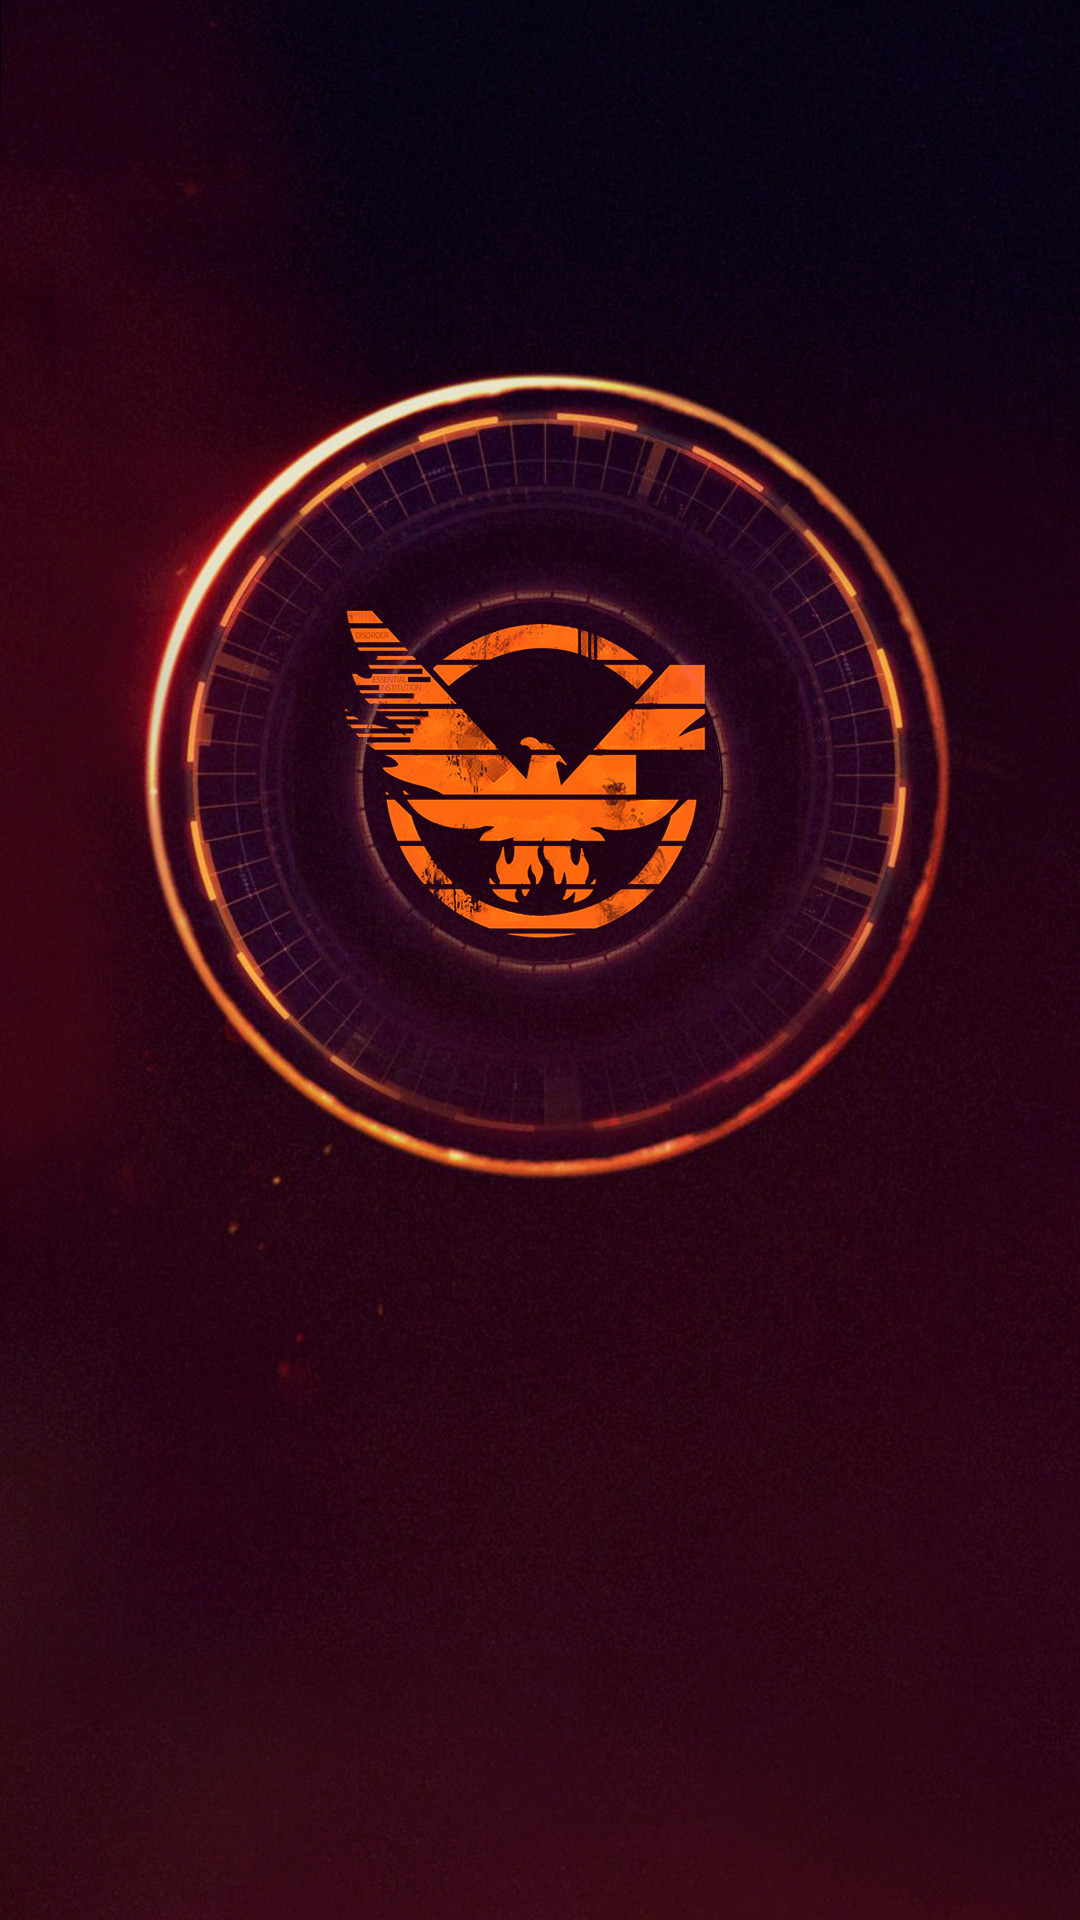 84 The Division Wallpaper 19 1080